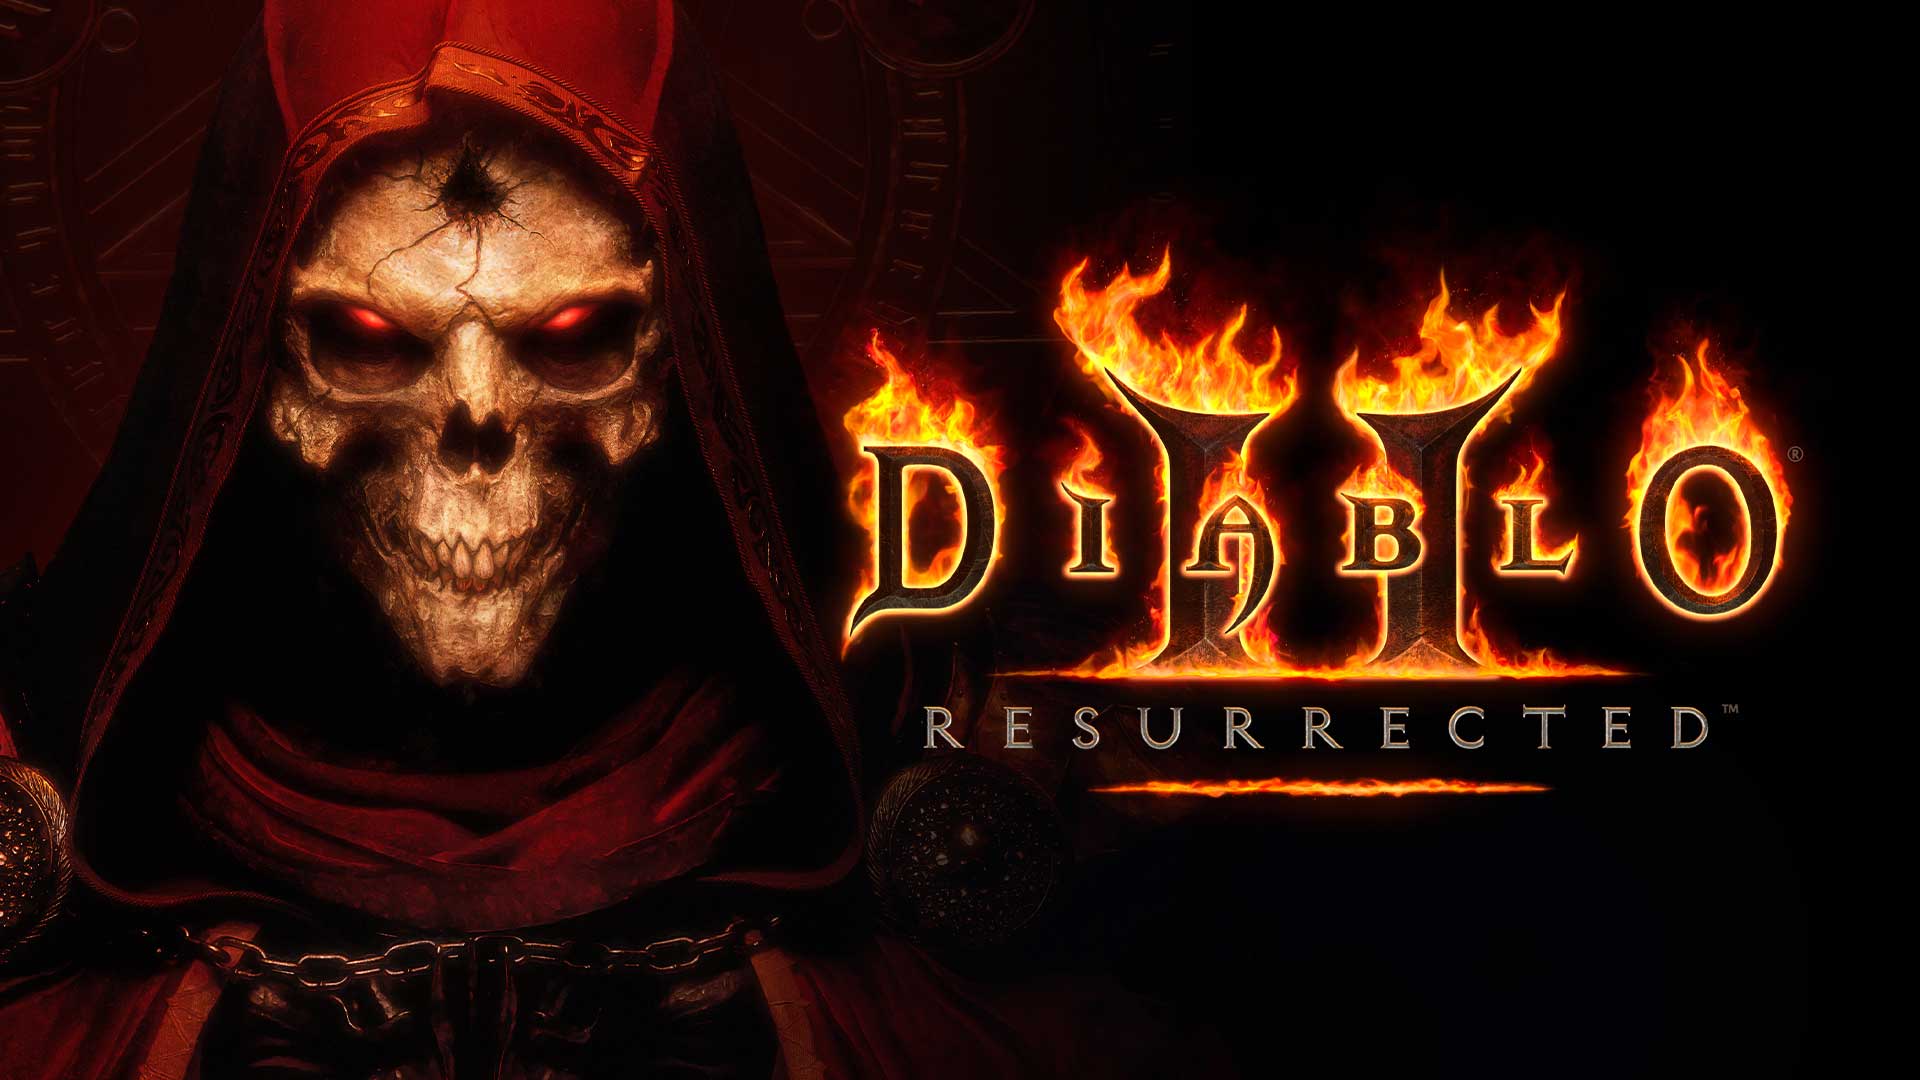 Diablo 2 Resurrected PC Requirements Revealed, Mod Support Confirmed